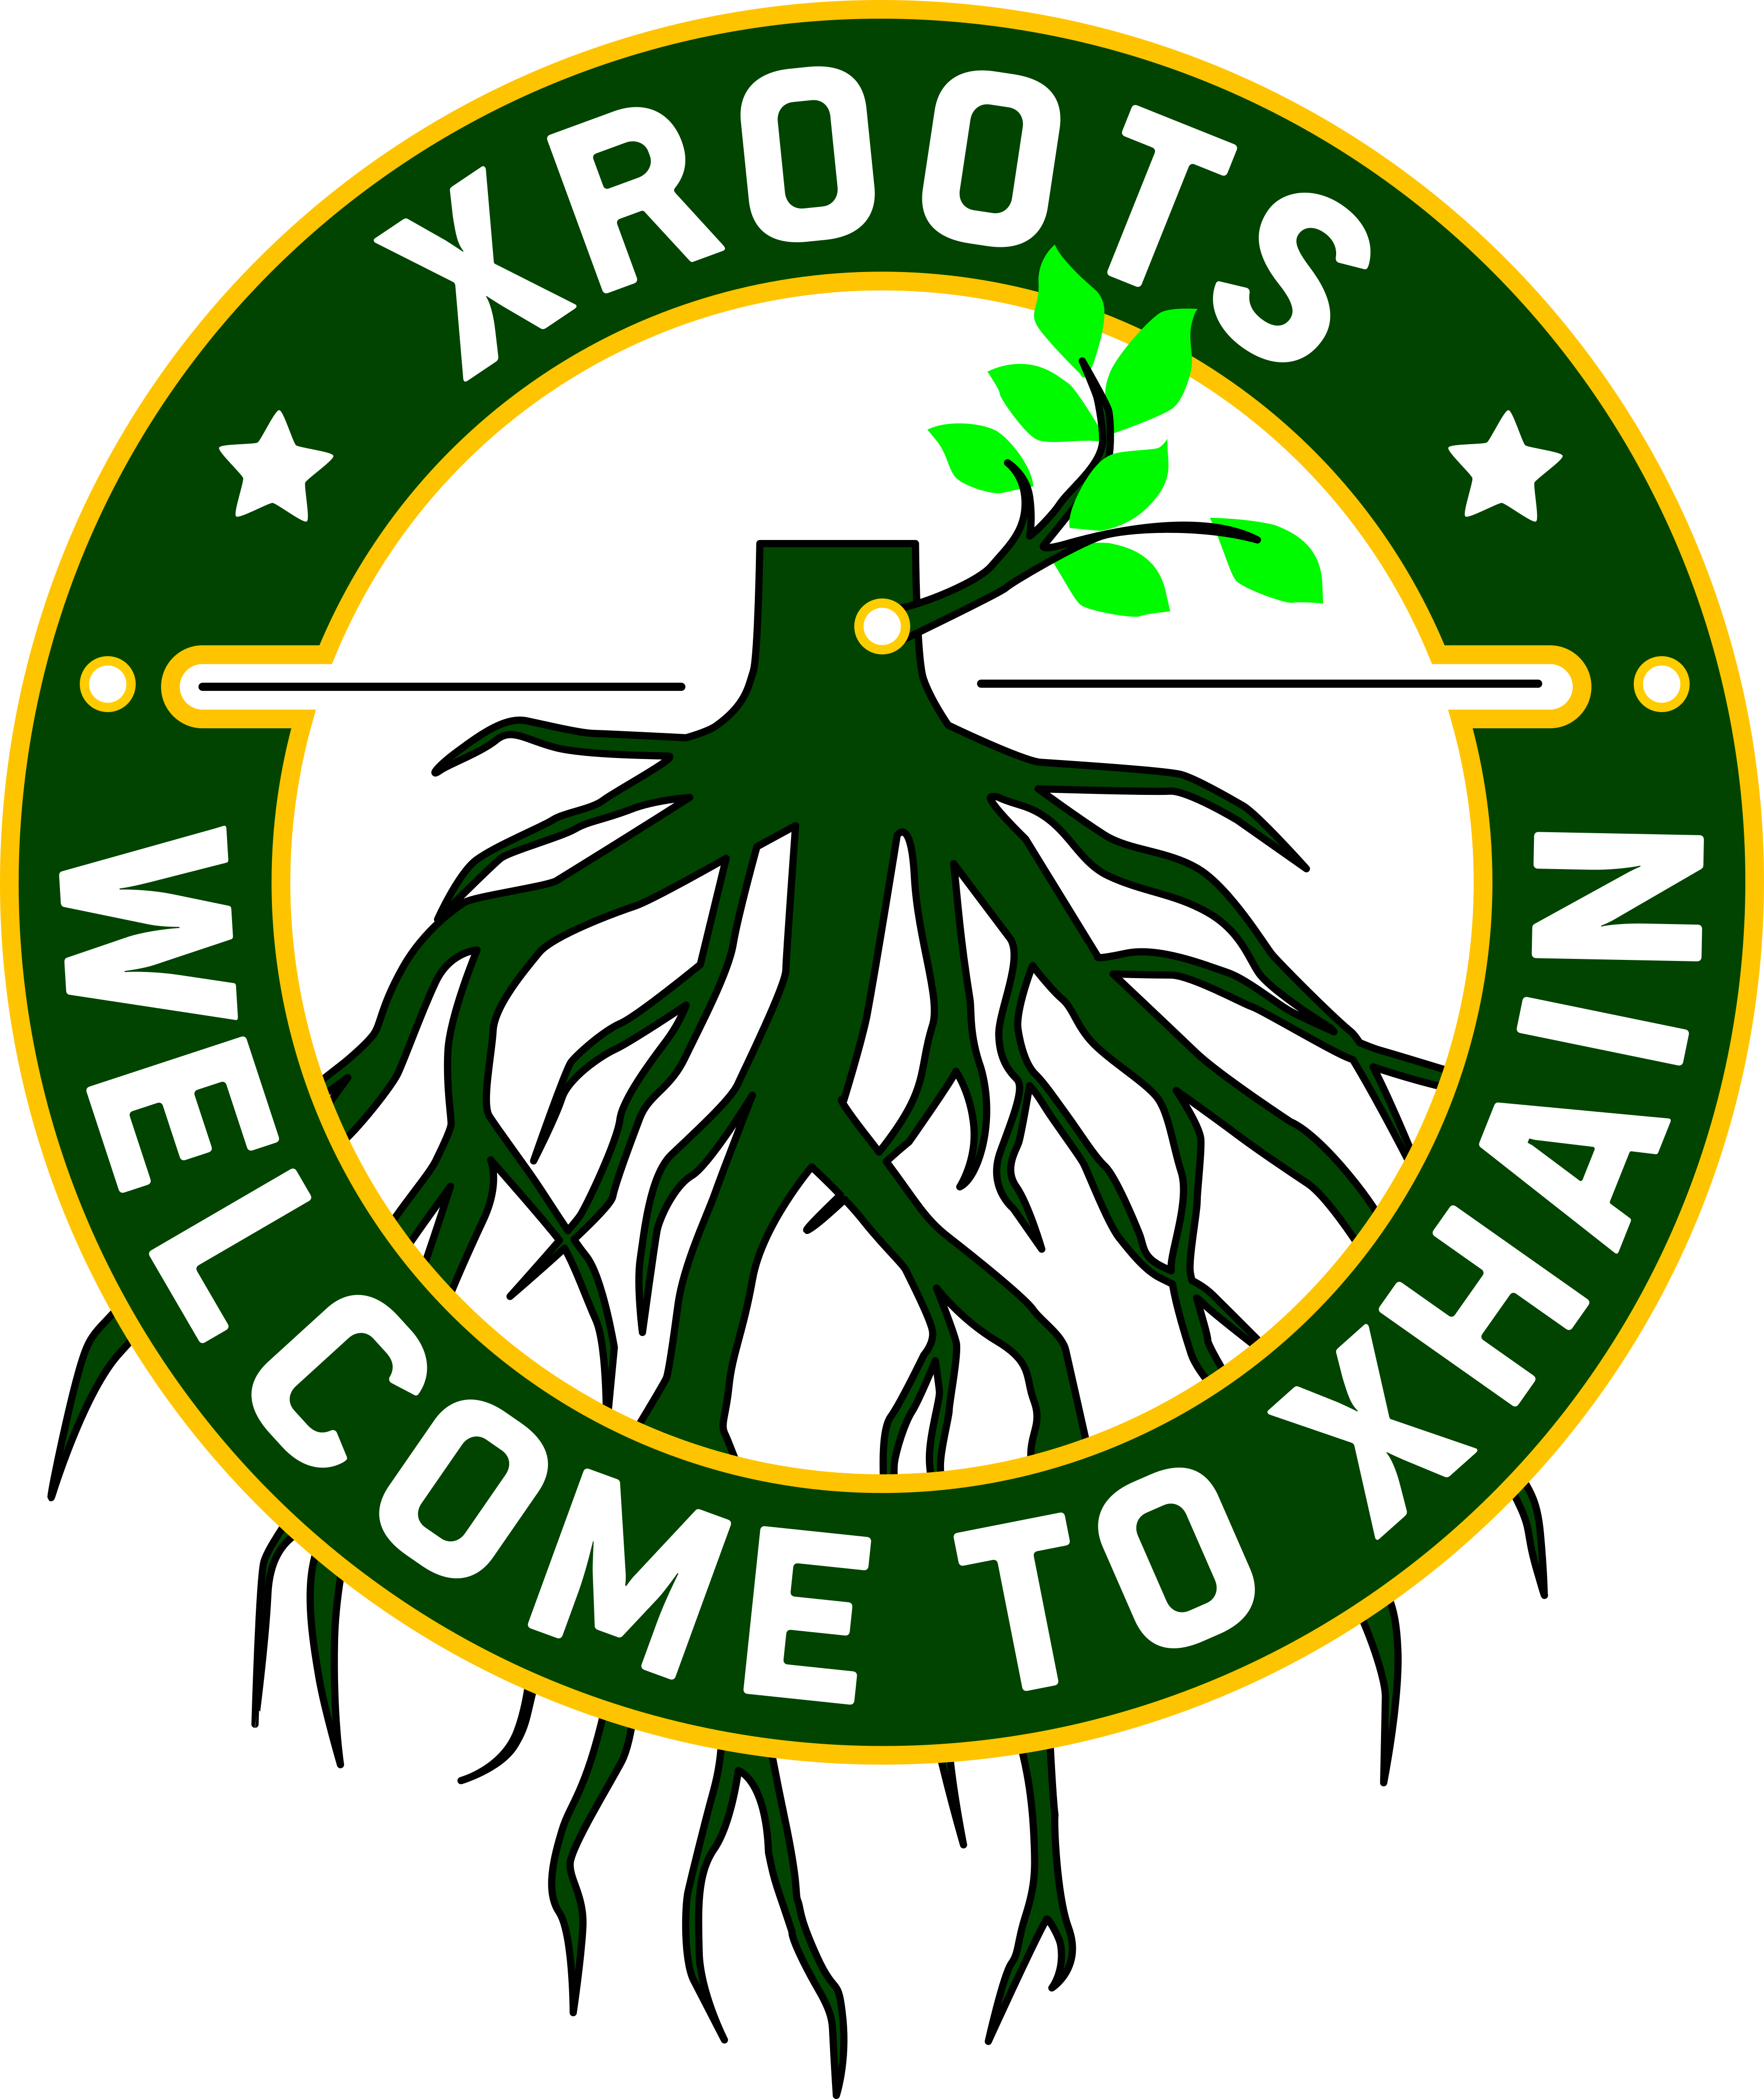 xhain_xroots_65mm.png